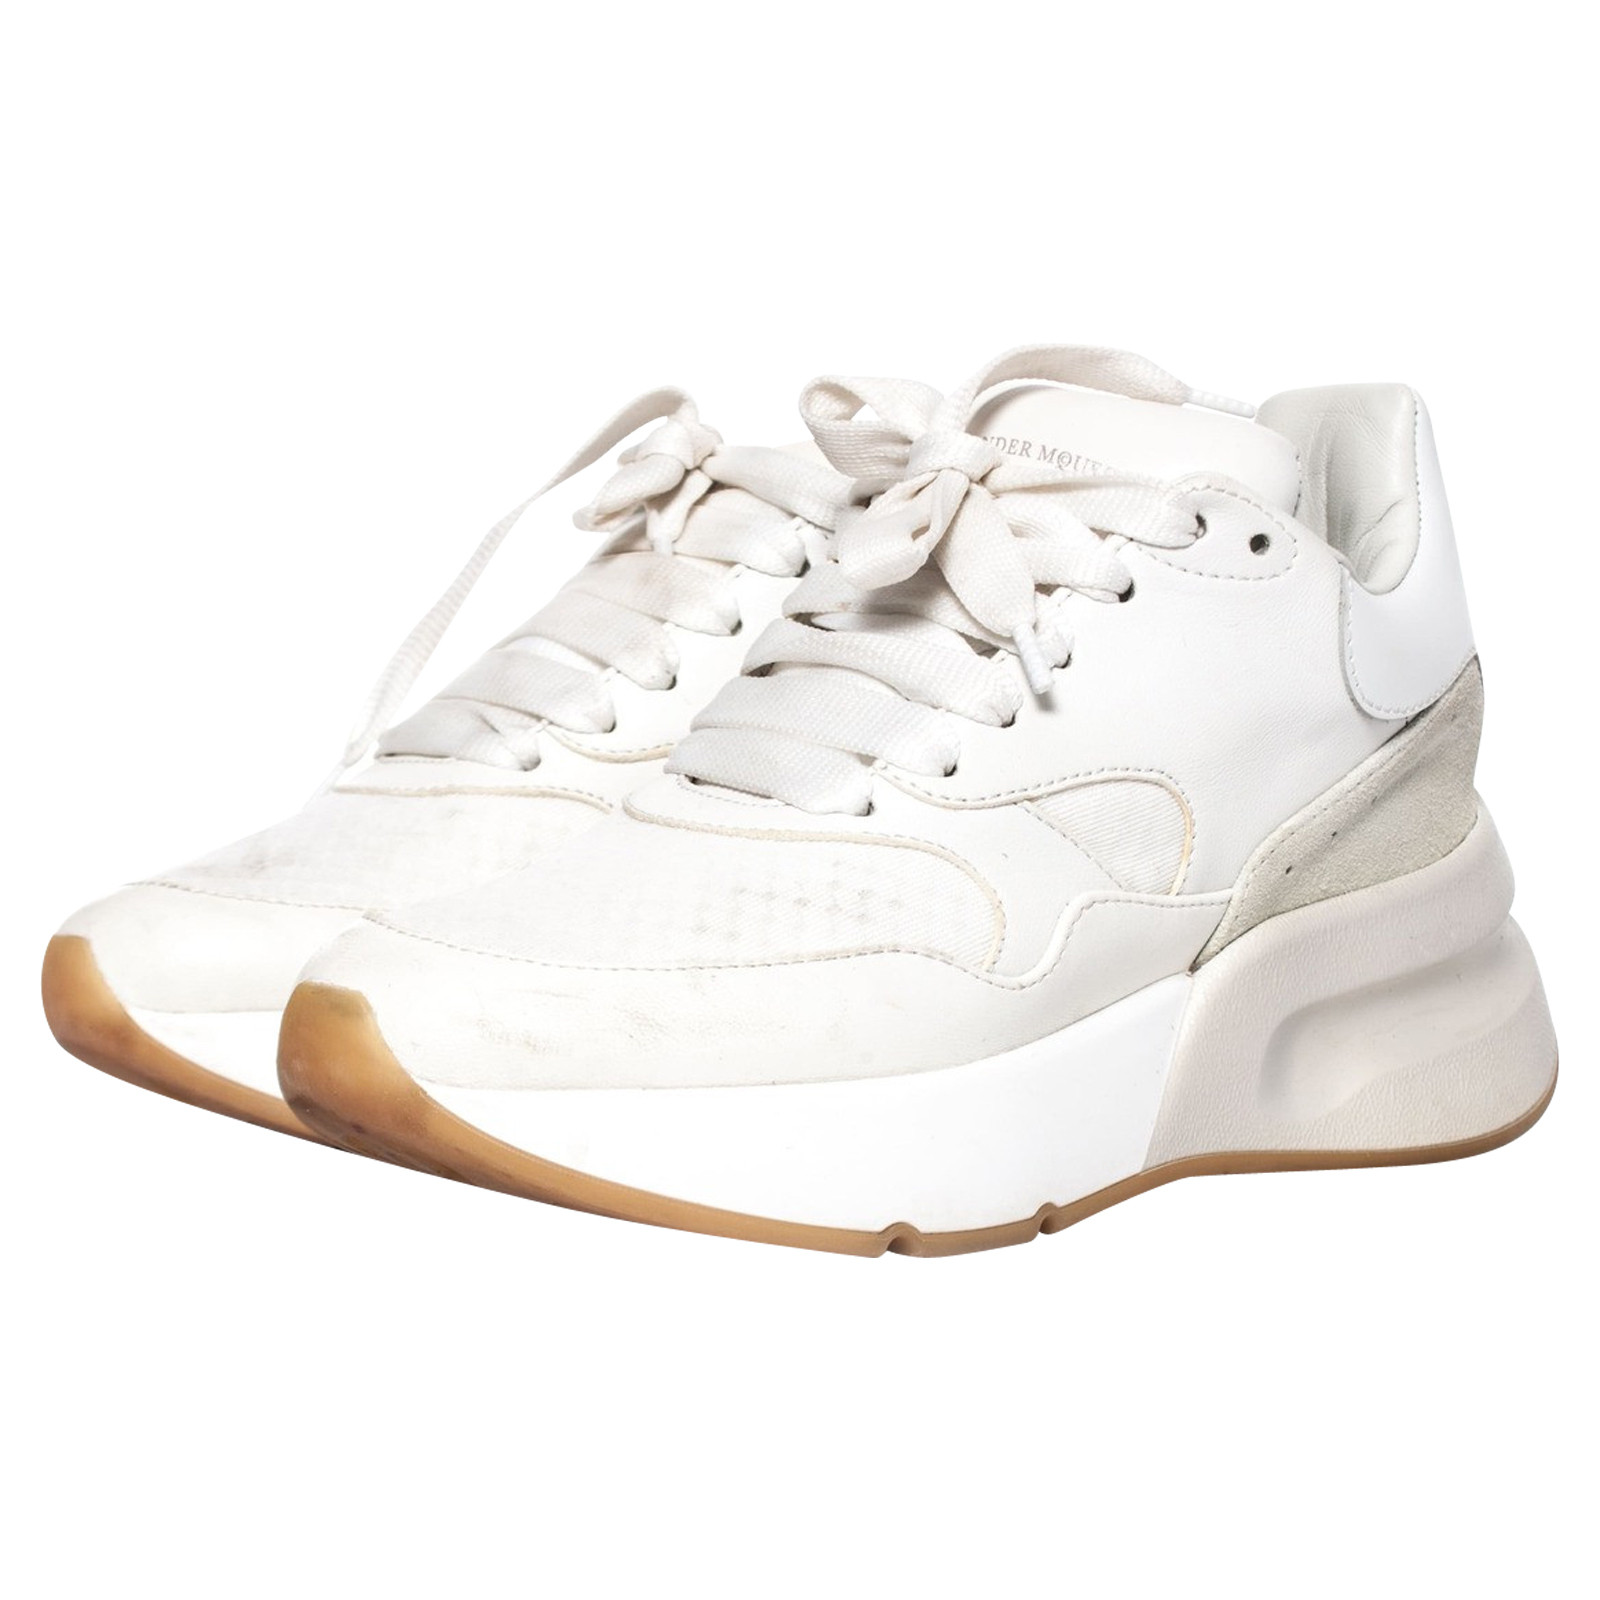 Alexander McQueen Trainers Leather in White - Second Hand Alexander McQueen  Trainers Leather in White buy used for 235€ (4697863)